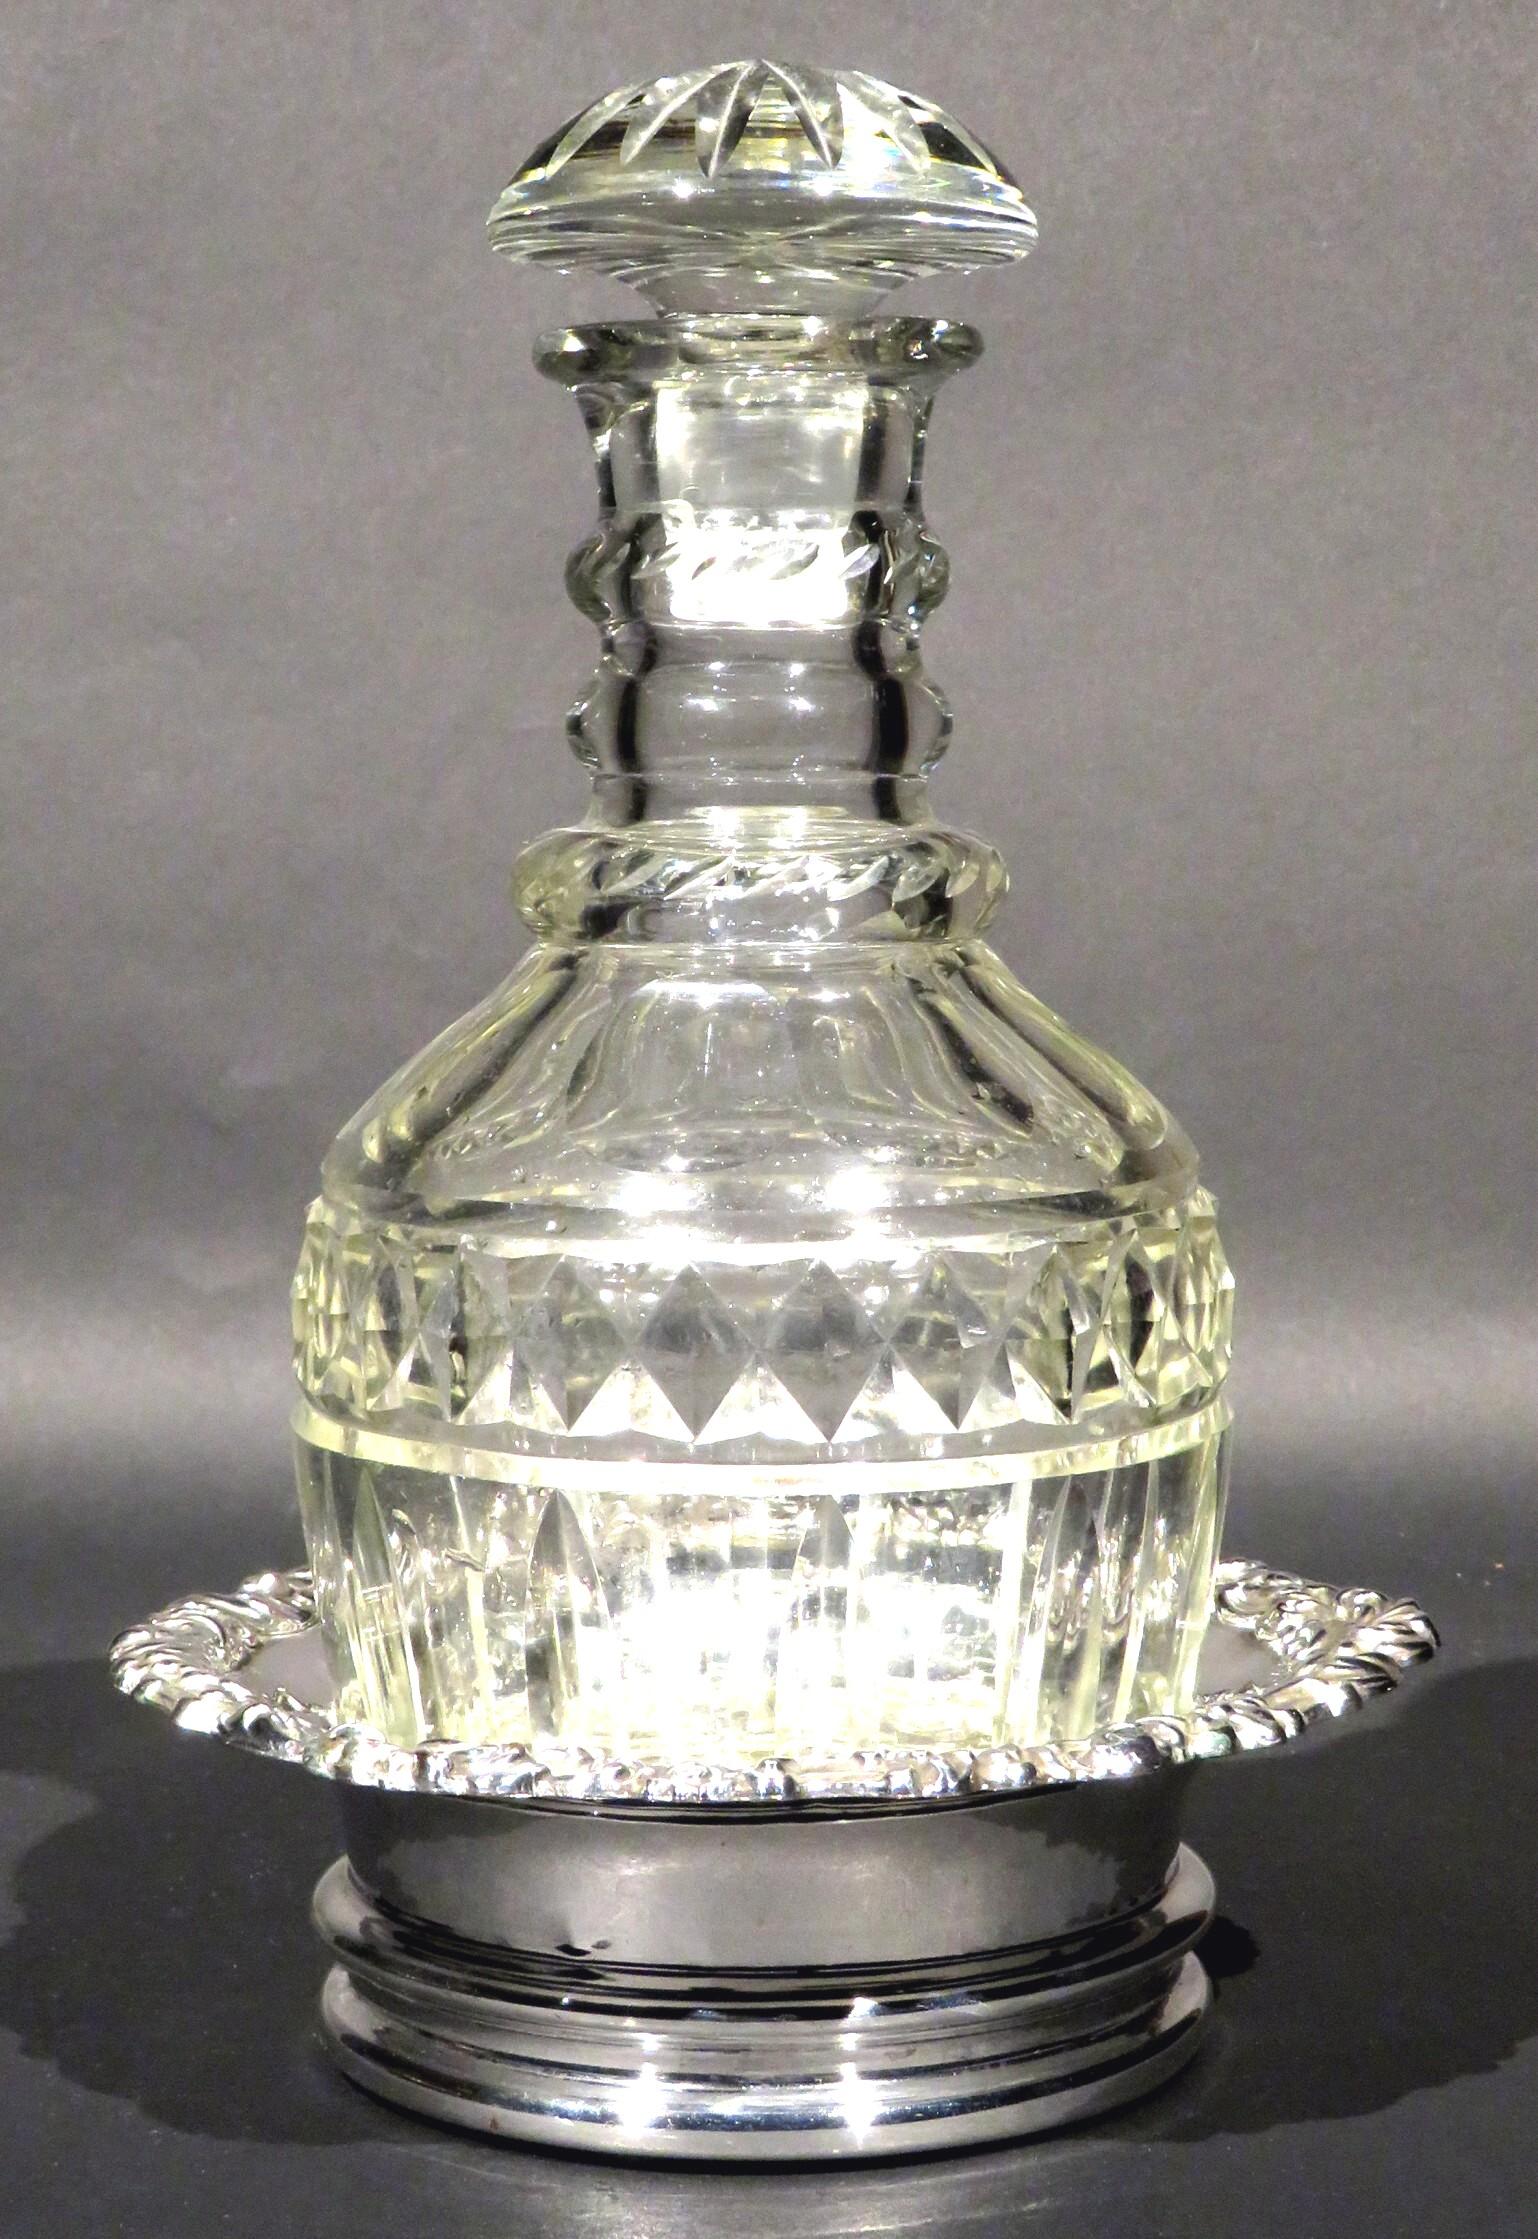 A Mid 19th Century Silver Plated Spirit Decanter Coaster, English Circa 1840 For Sale 1